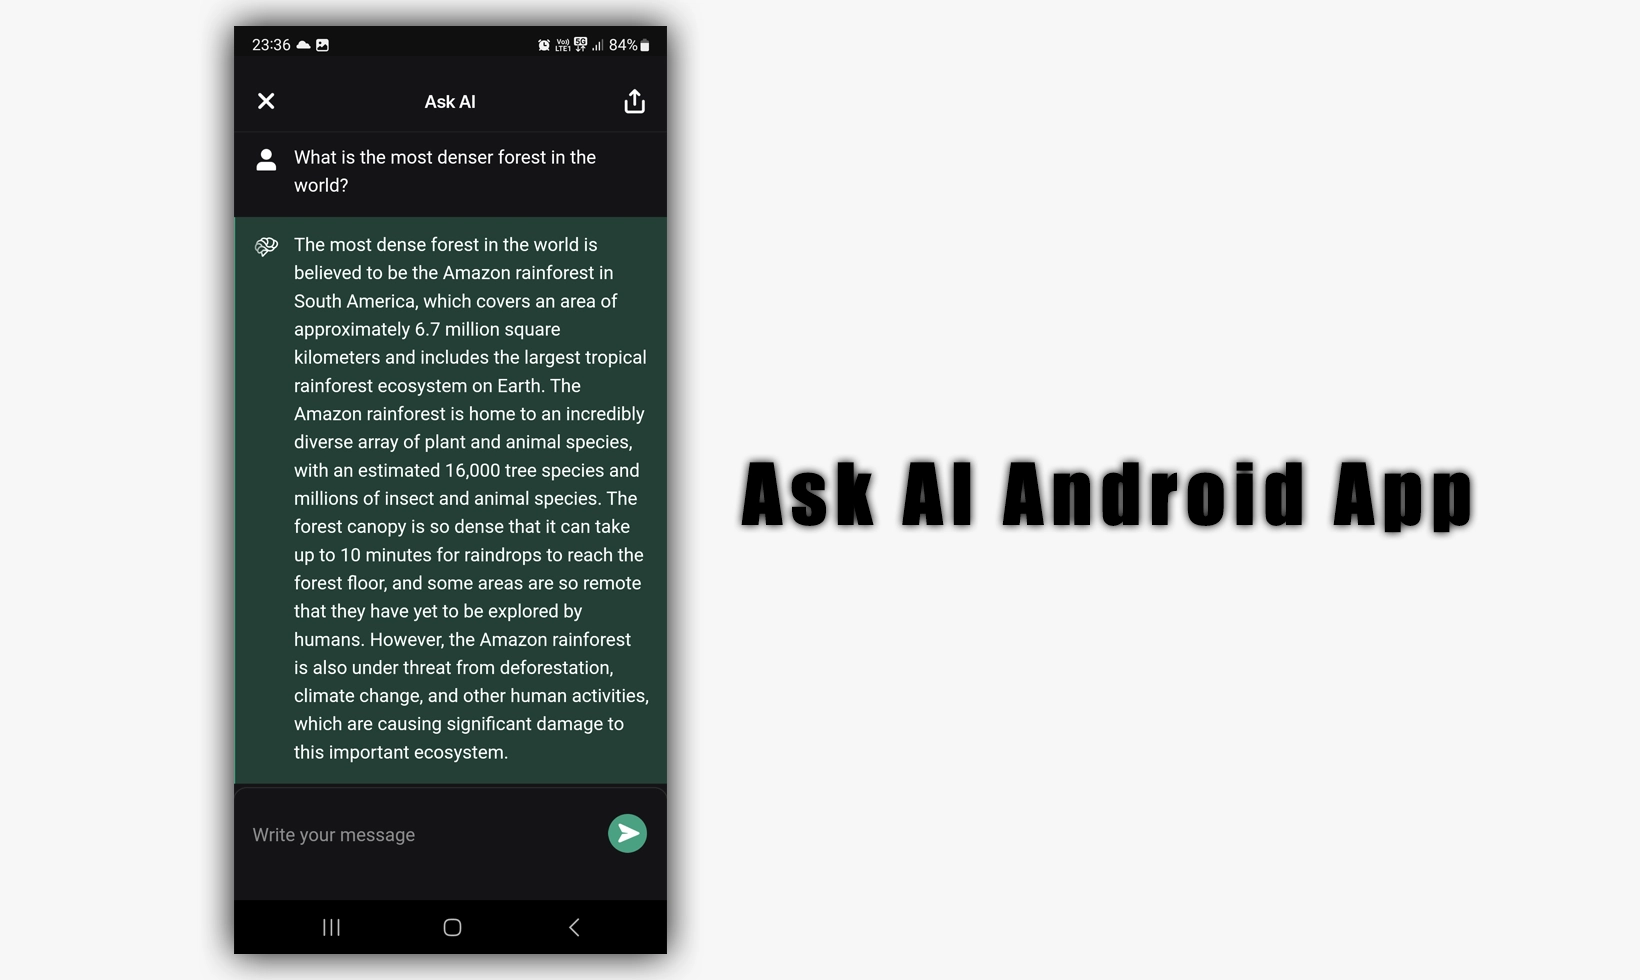 Ask AI Android App